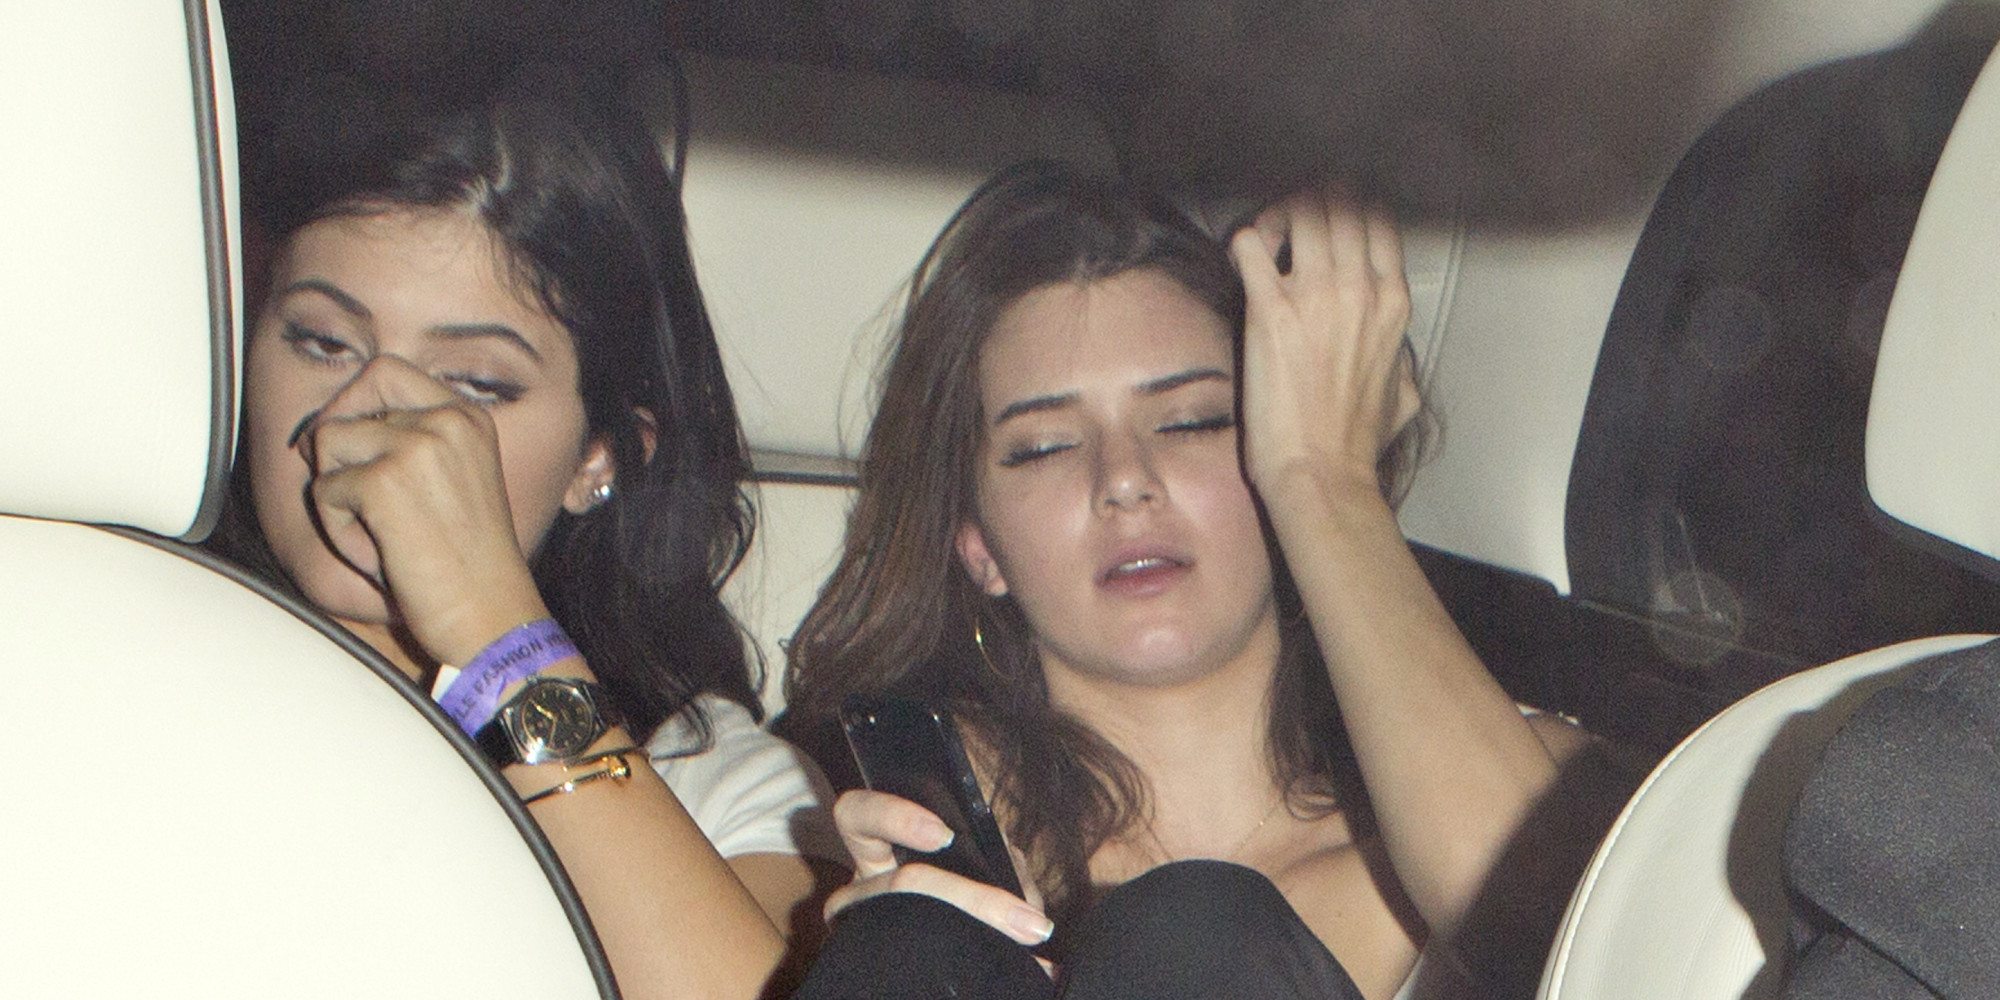 Kendall Kylie Jenner Hit Up SexThemed Club While Still Very Underage